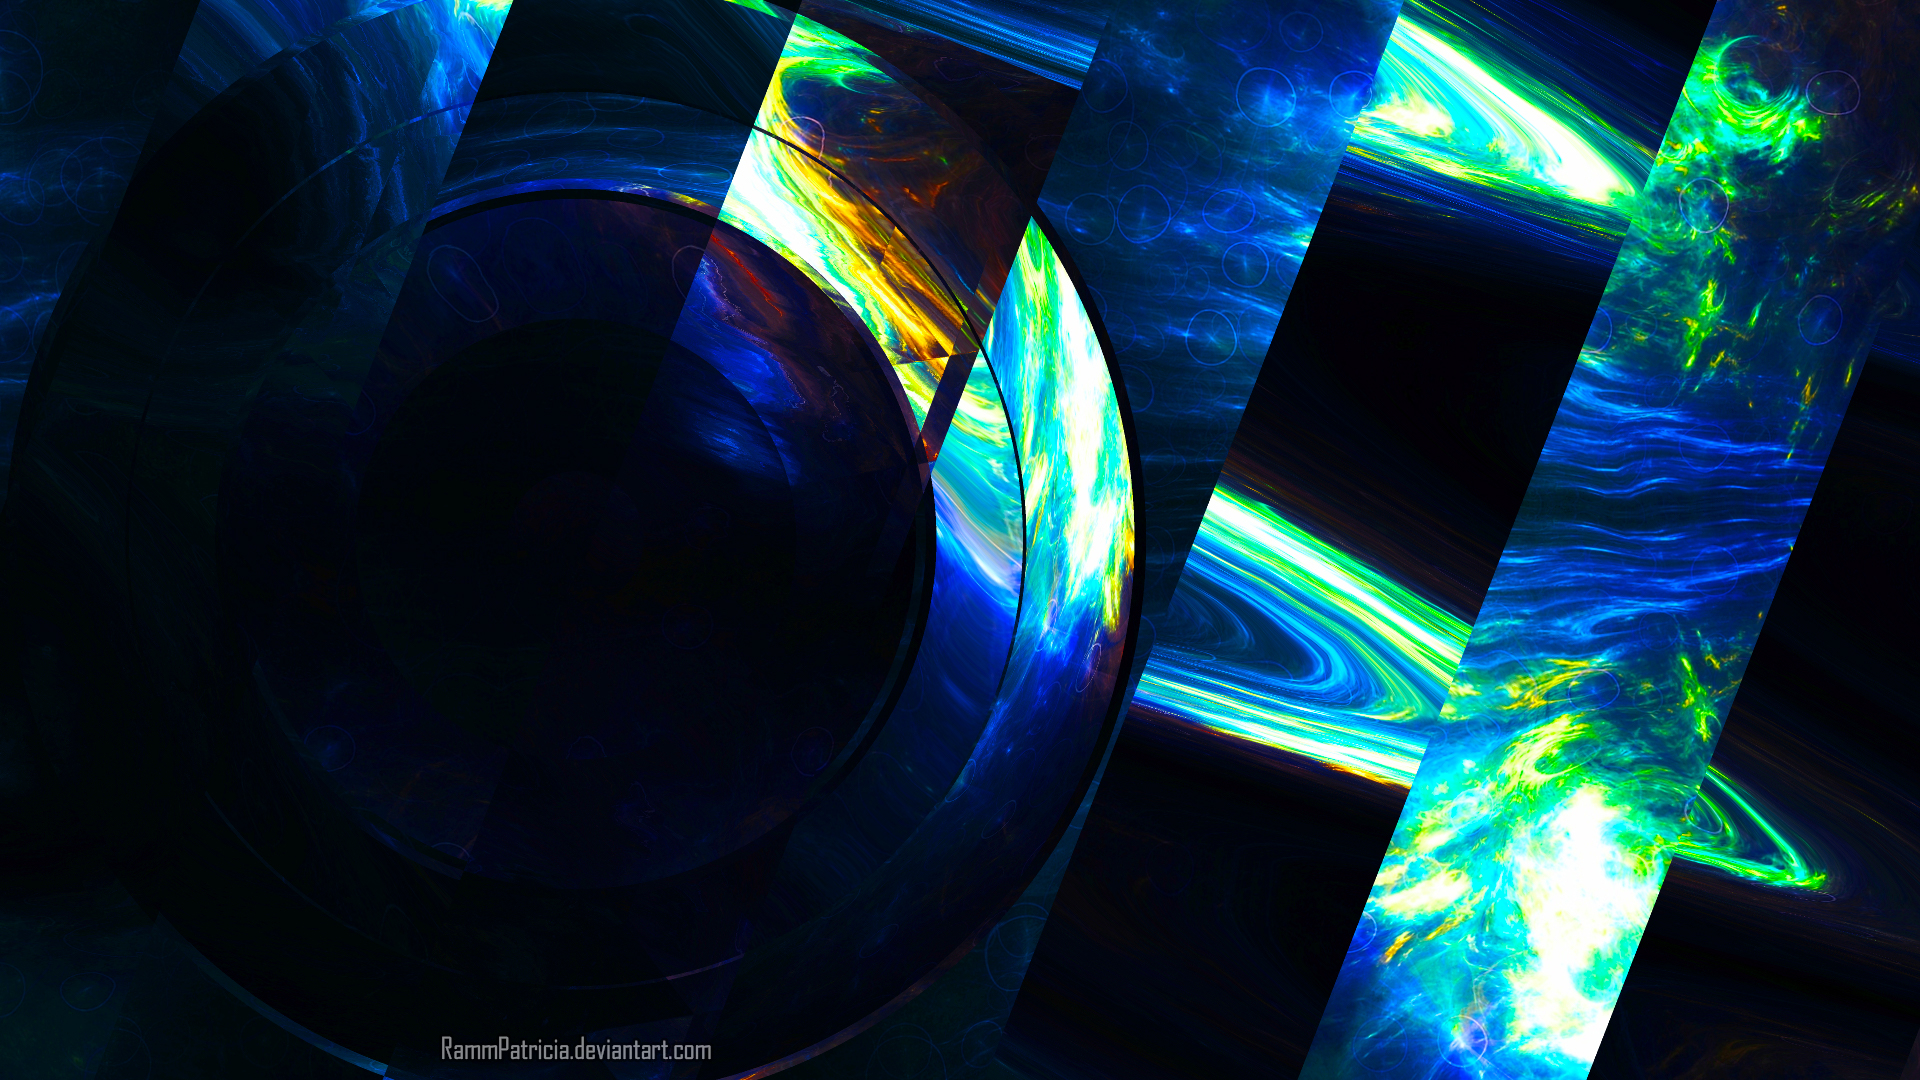 General 1920x1080 RammPatricia abstract digital art science fiction watermarked space planet Saturn